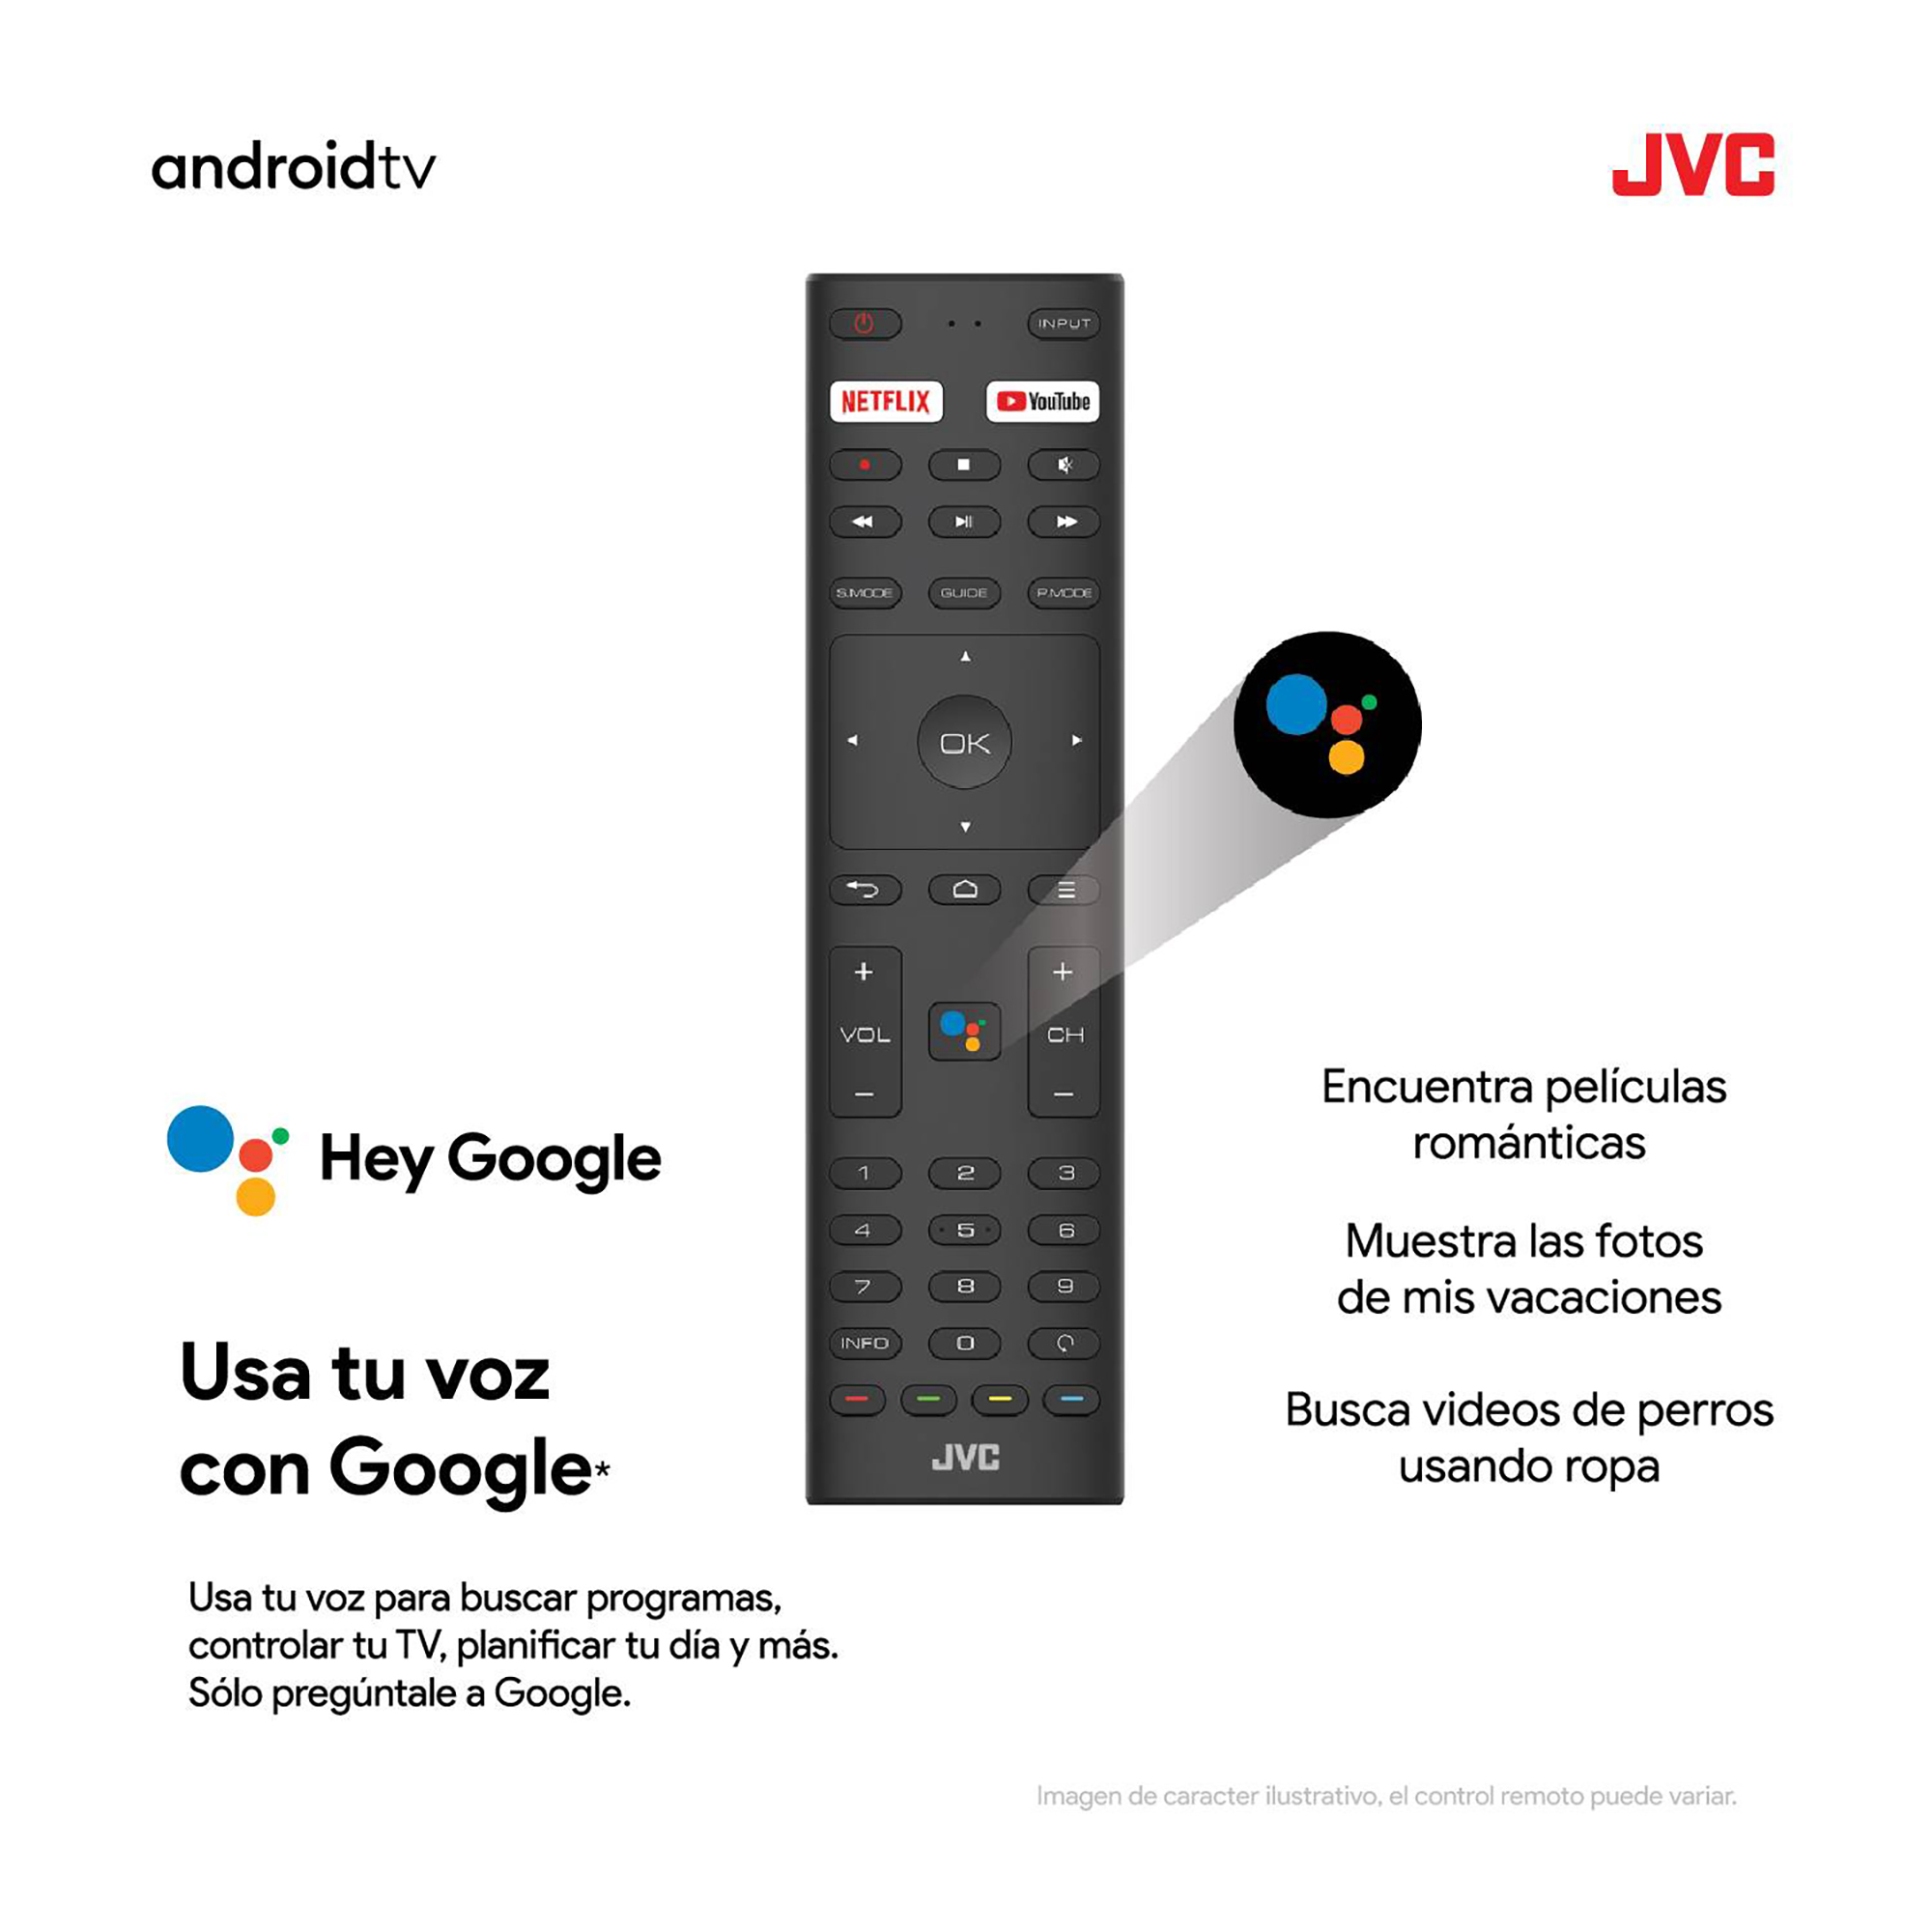 Televisor LED HD JVC 32 con Android TV - Multimax Store